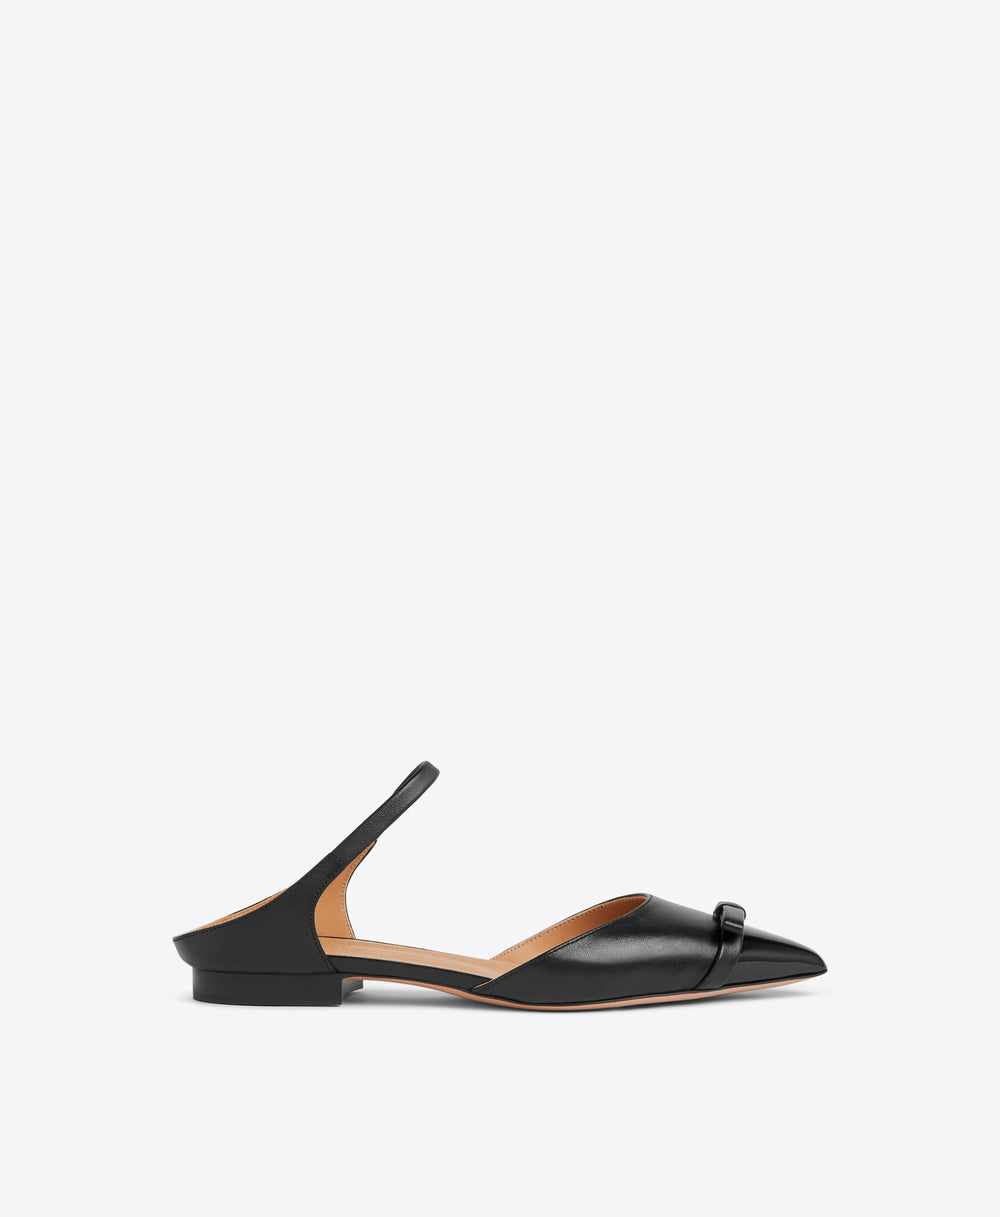 Malone Souliers Blythe Flat Black Leather Mules